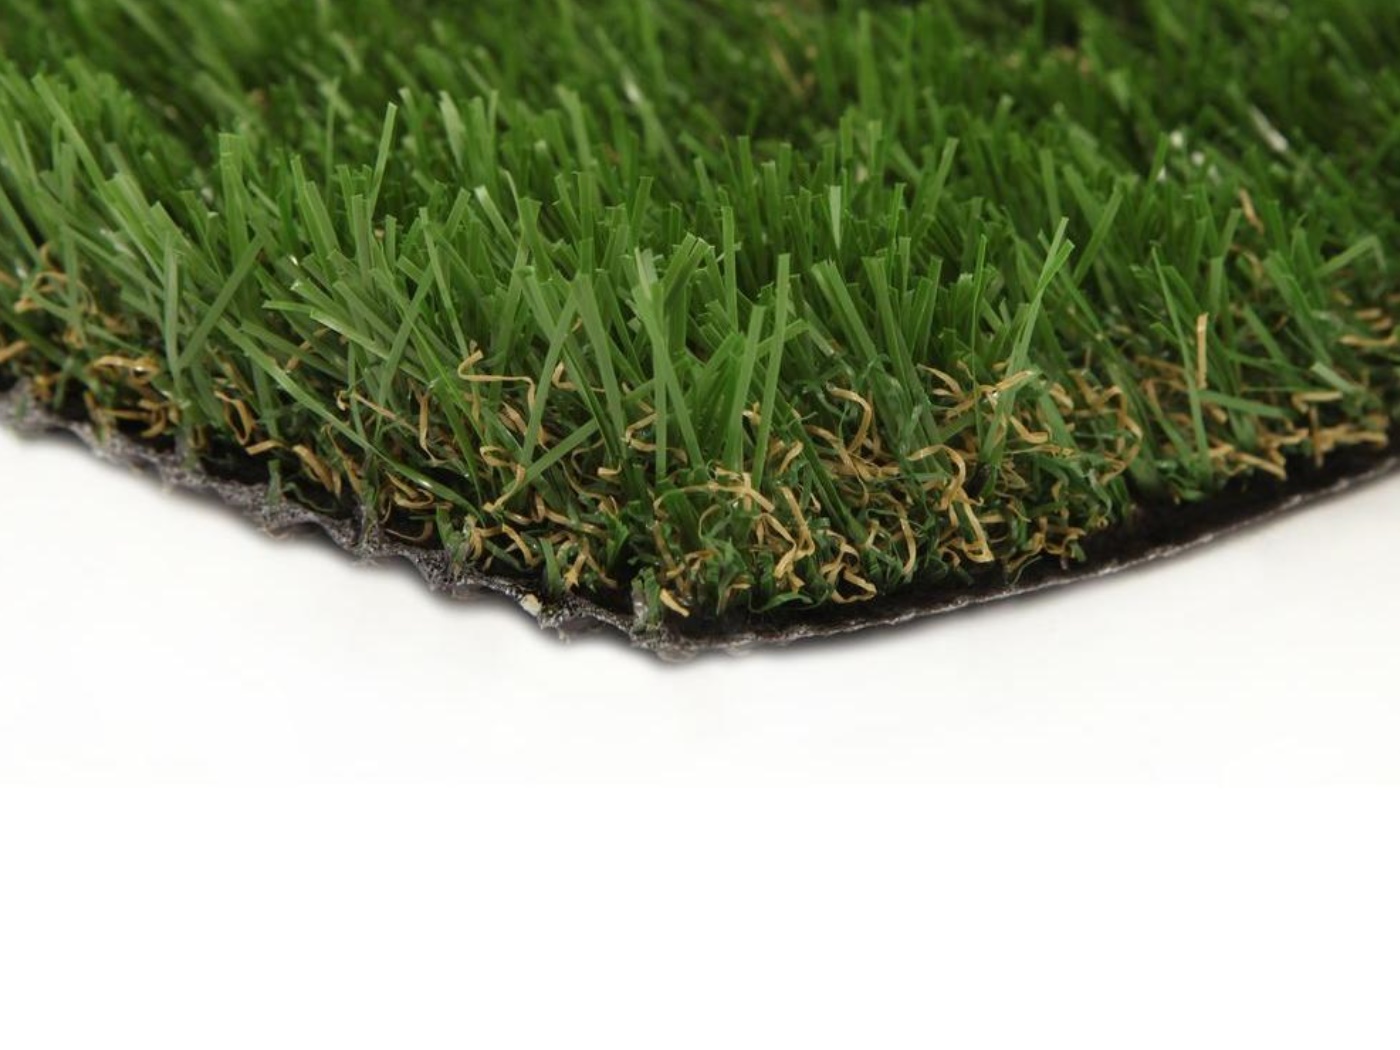 Artificial Turf Installation In, Landscaping Companies In Wilmington Ma